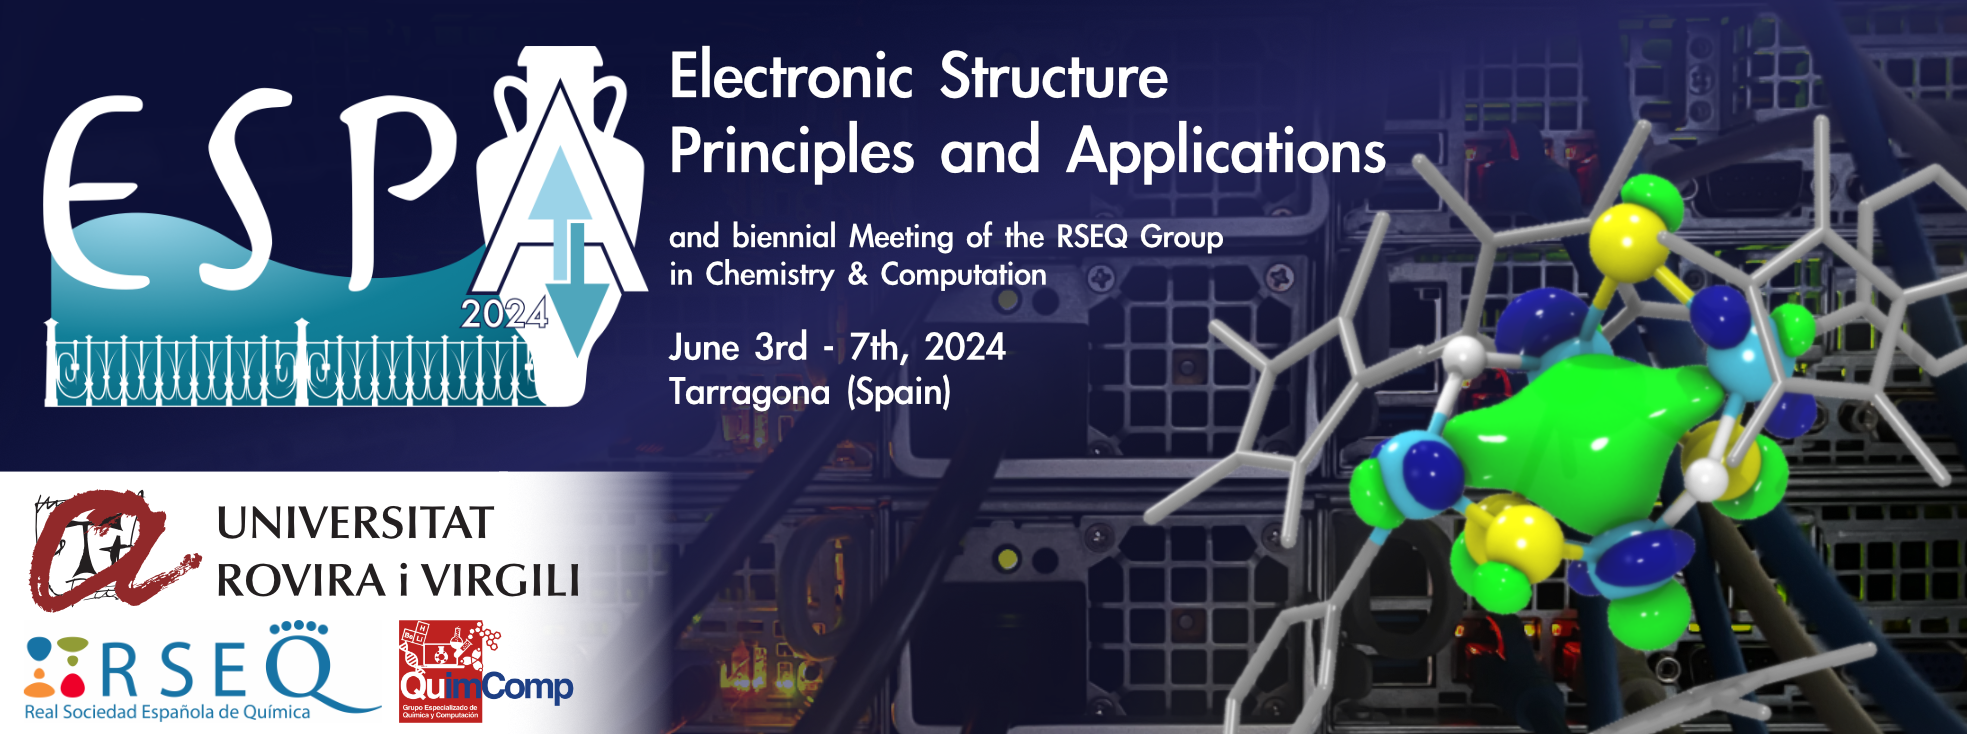 Electronic Structure Principles and Applications and biannual Meeting of the RSEQ Group in Chemistry and Computation (ESPA 2024)